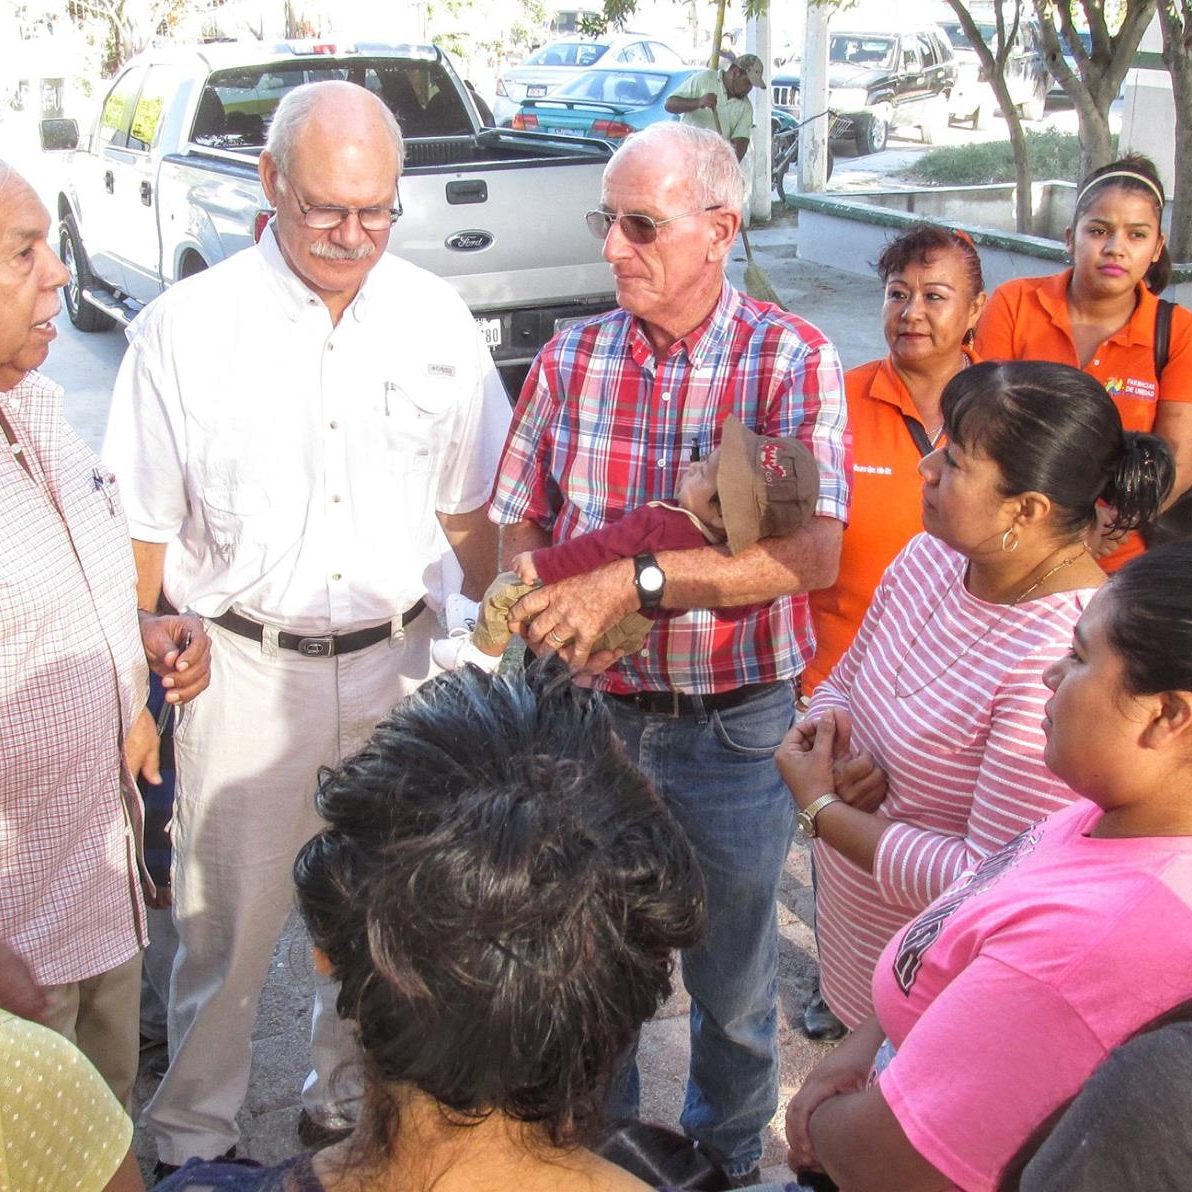 Dennis and ladies from La Puerta de Esperanza, a home for unwed pregnant teenage girls, are being greeted by George and Joe of AMO along with Maria Del Rosario and other DIF staff ready to help.